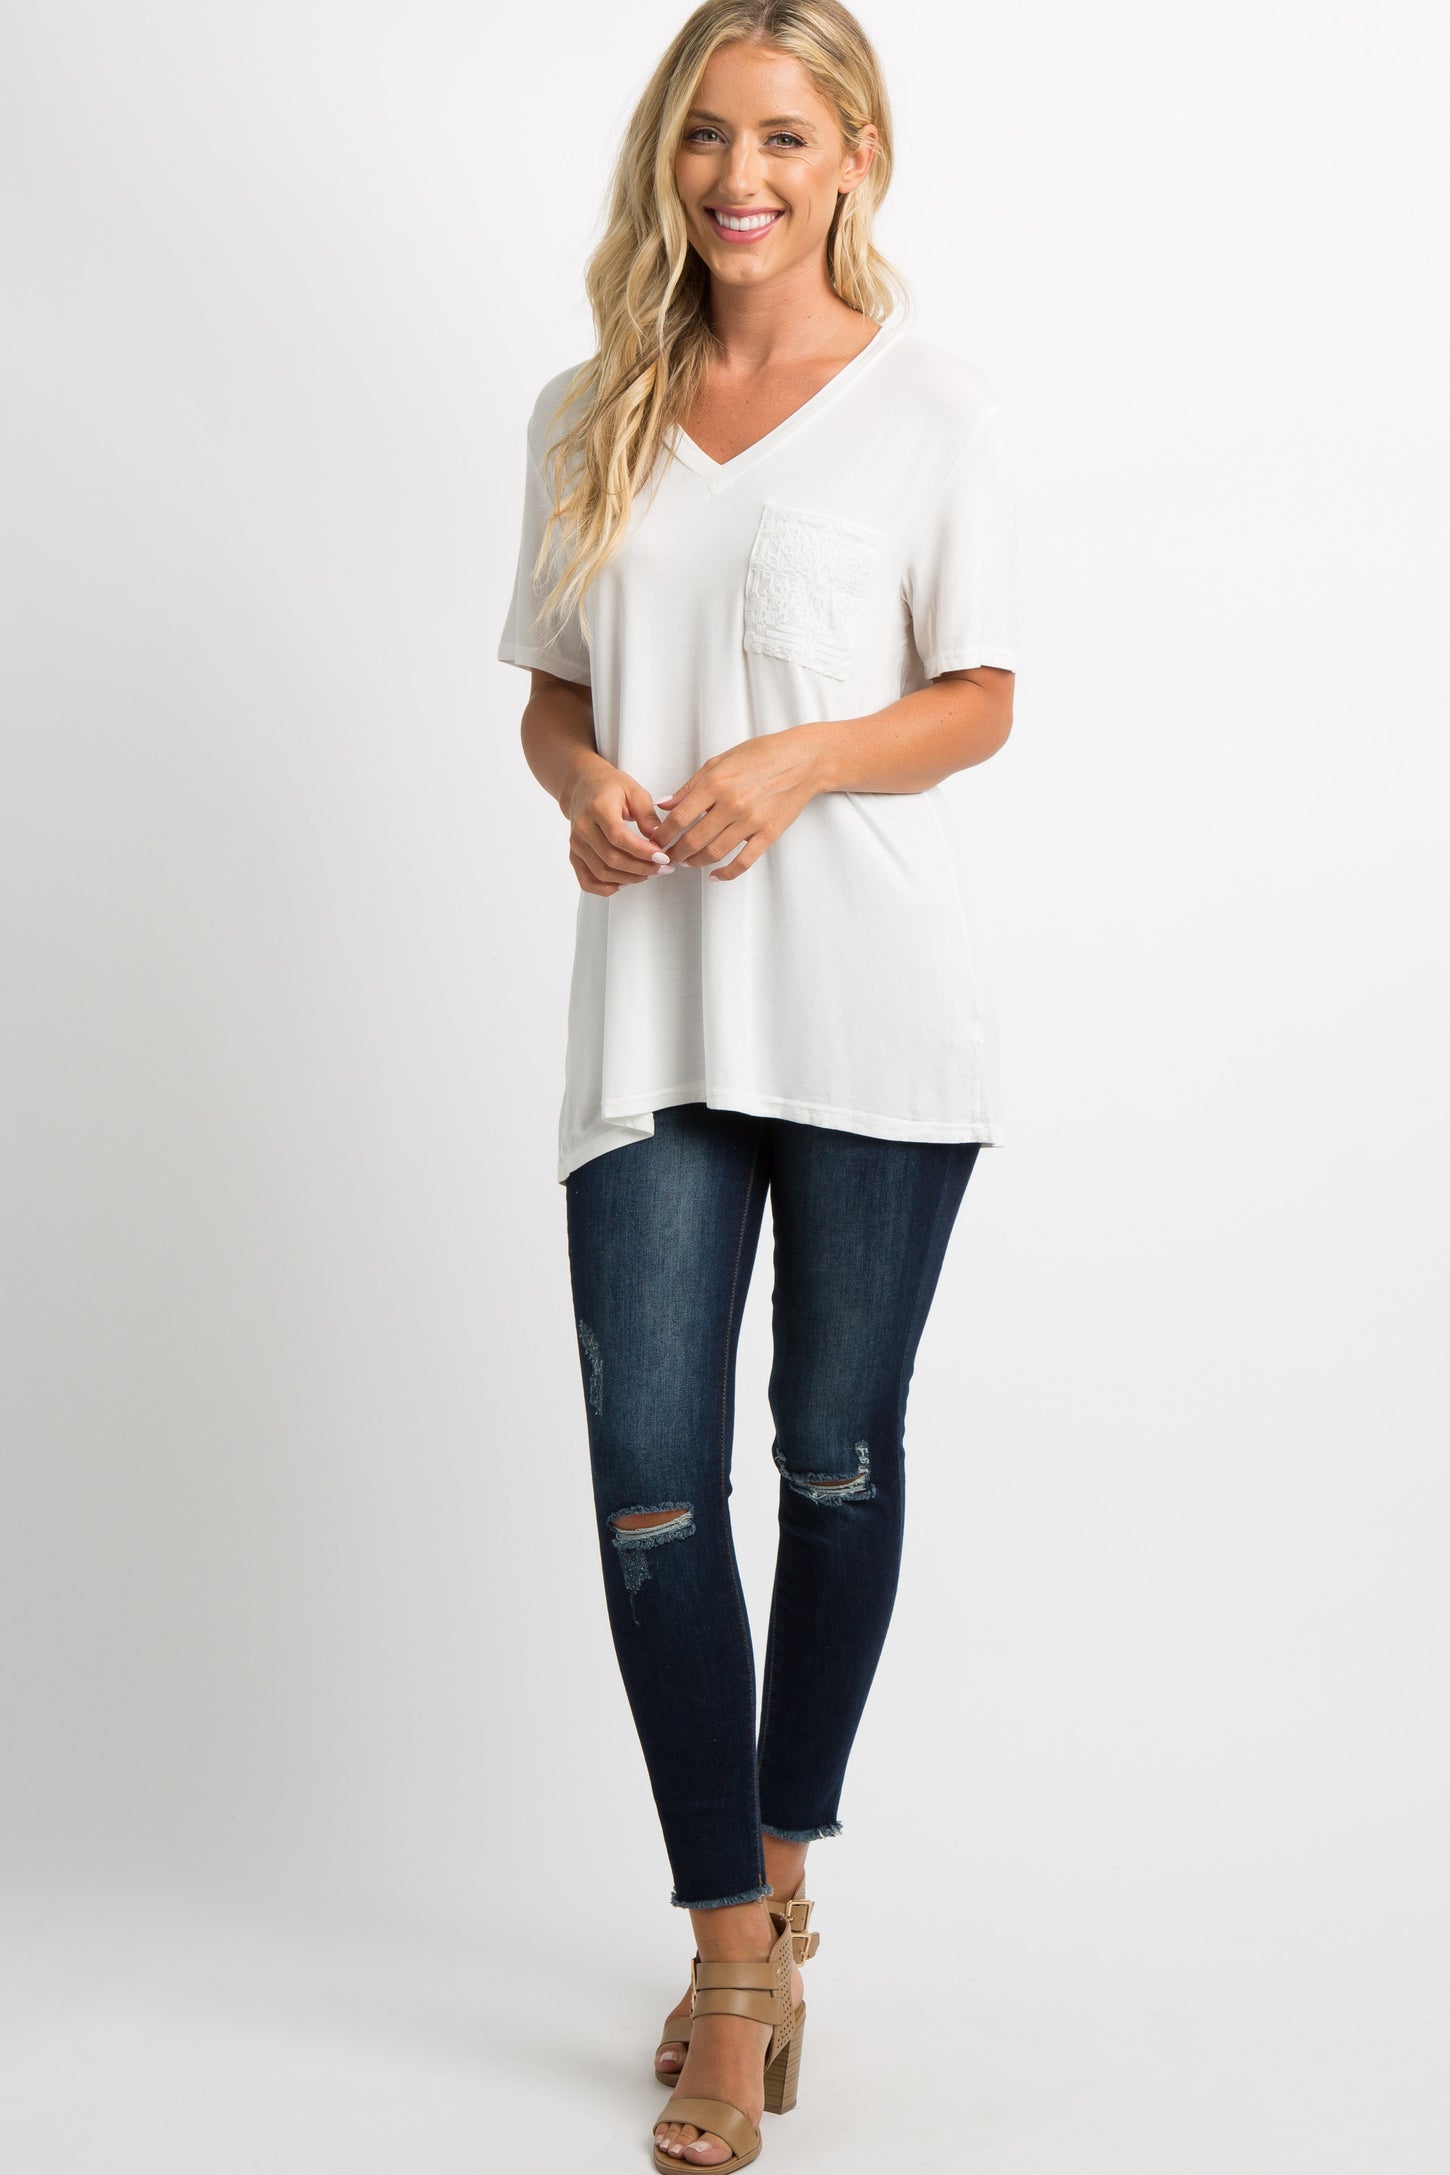 Ivory Embroidered Mesh Pocket Top